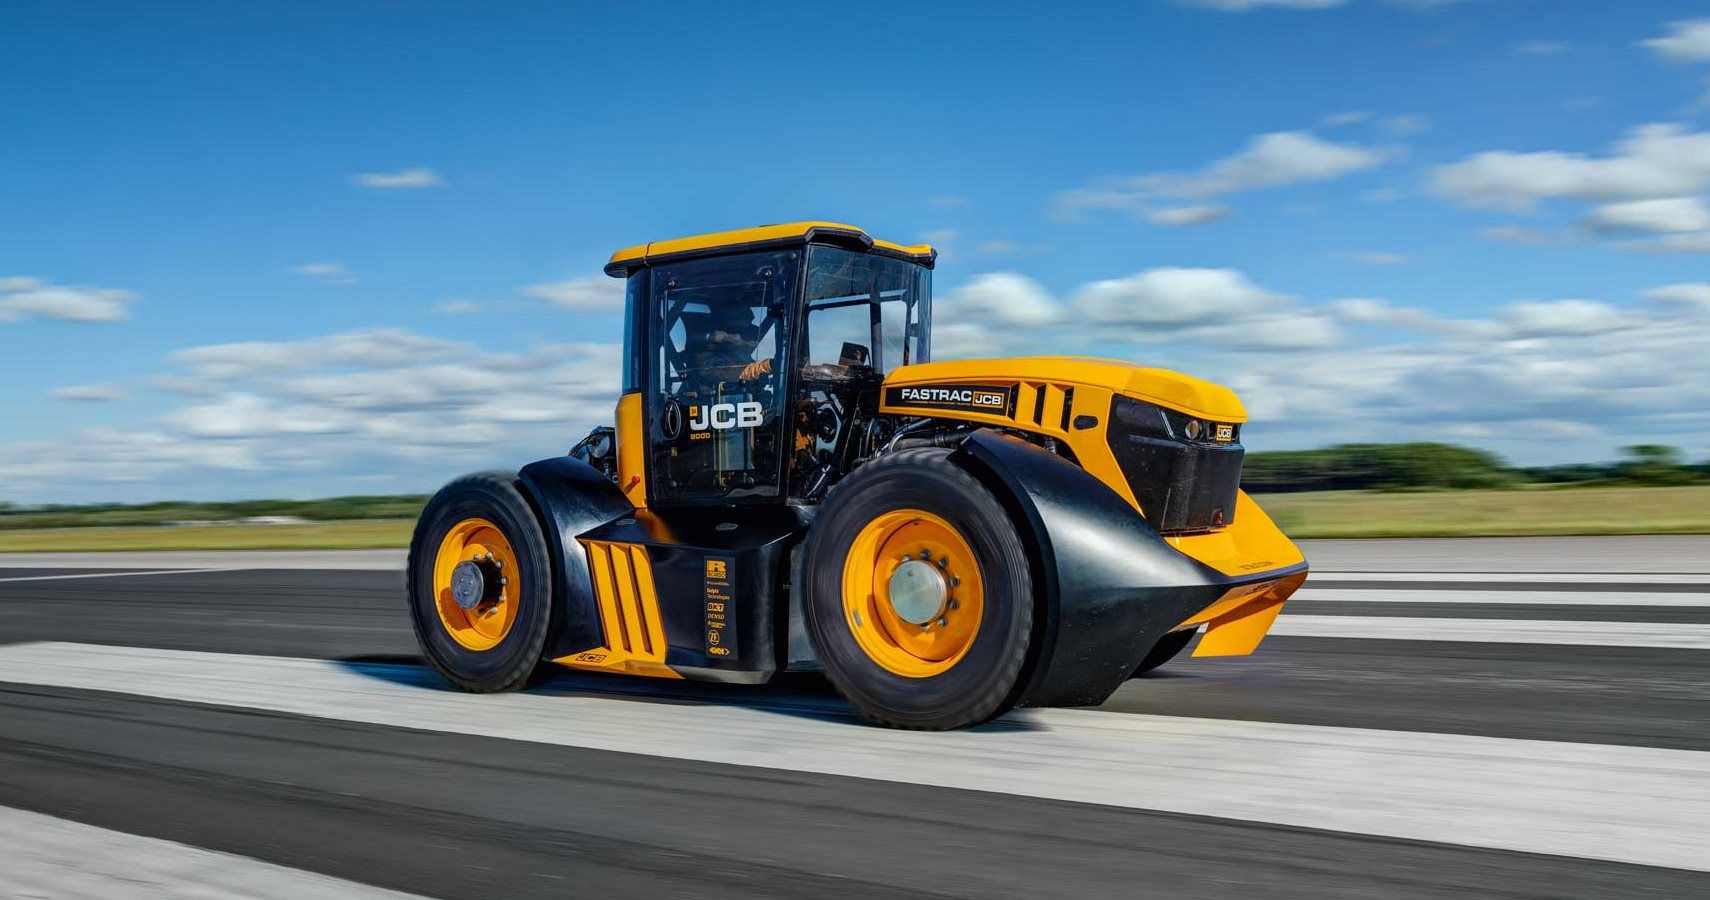 This World's Fastest Tractor Has 1,000 Horsepower From A 7.2-Liter Diesel Engine